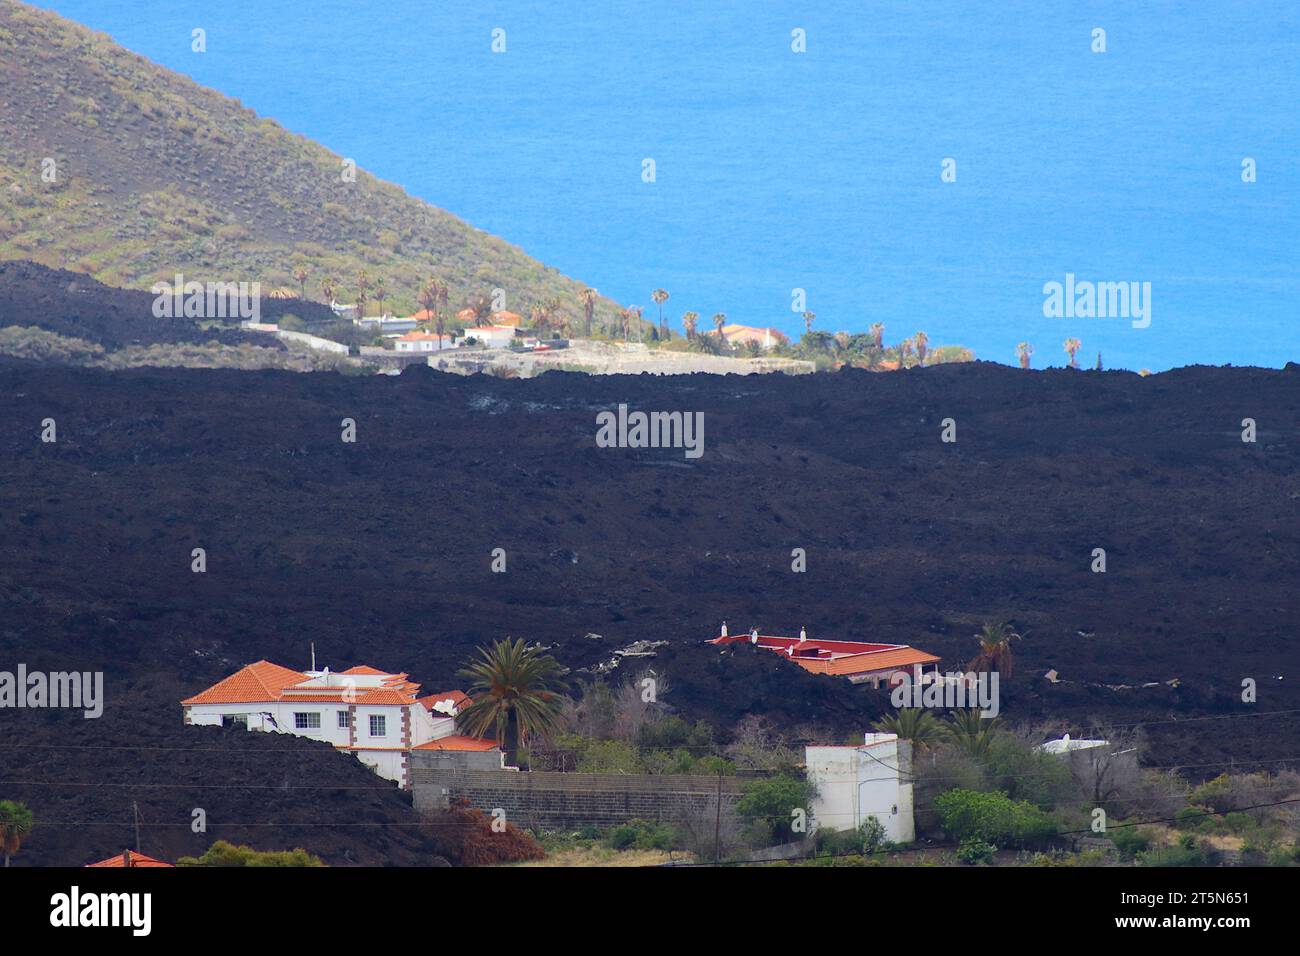 Homes and business properties engulfed in lava flow and volcanic ash ejected from the eruption at Cumbre Vieja Volcanic Ridge, La Palma, 2022. Stock Photo